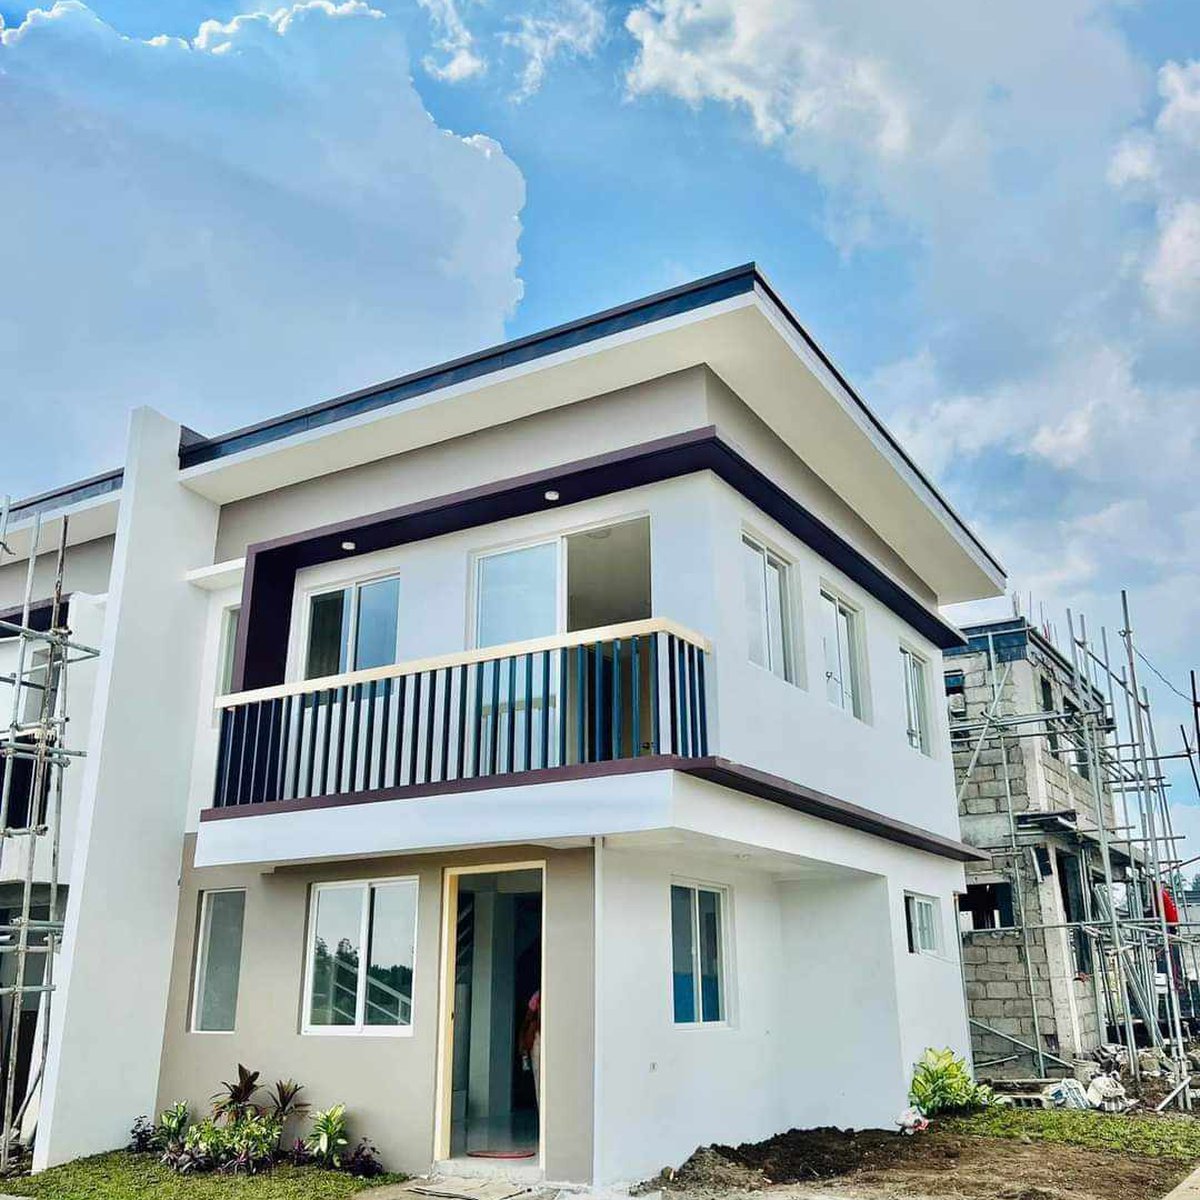 3-bedroom townhouse for sale in lipa batangas